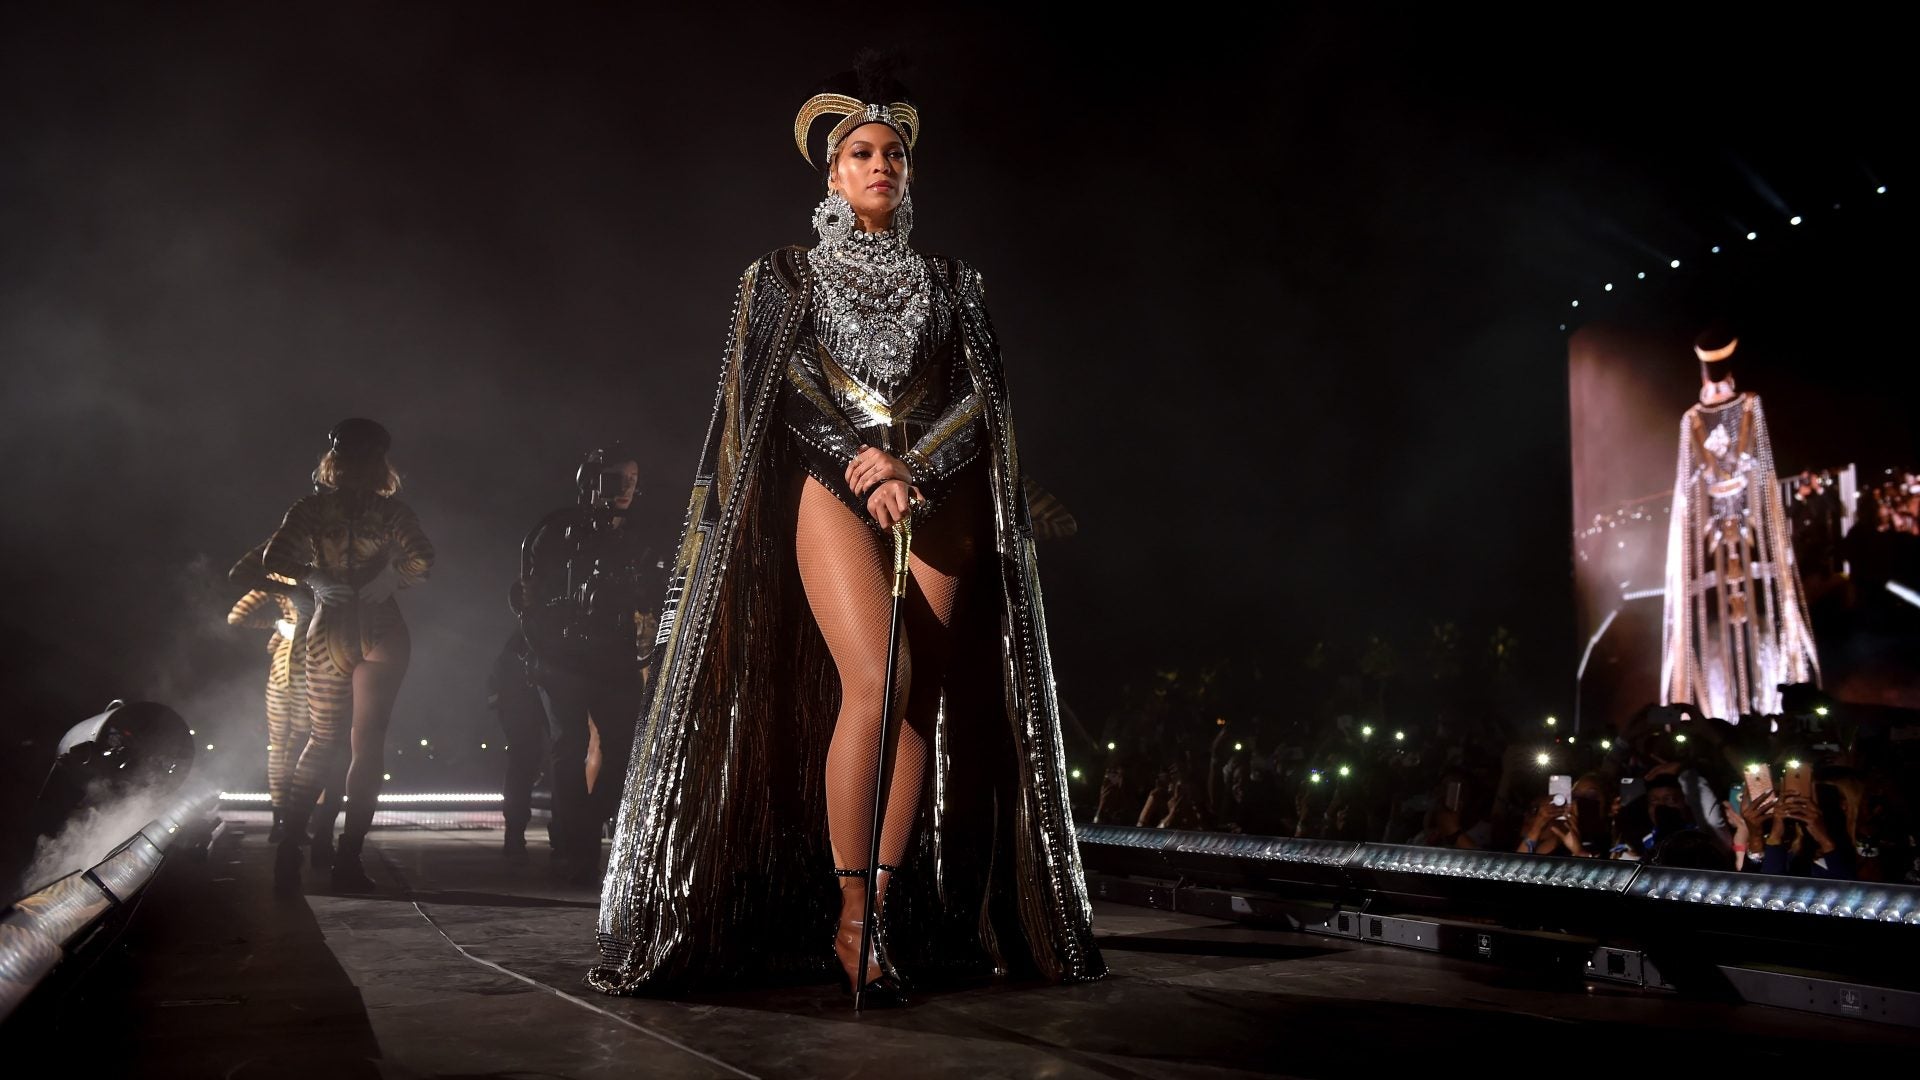 Beyoncé's Vogue Portrait Is Being Acquired By The Smithsonian’s National Portrait Gallery